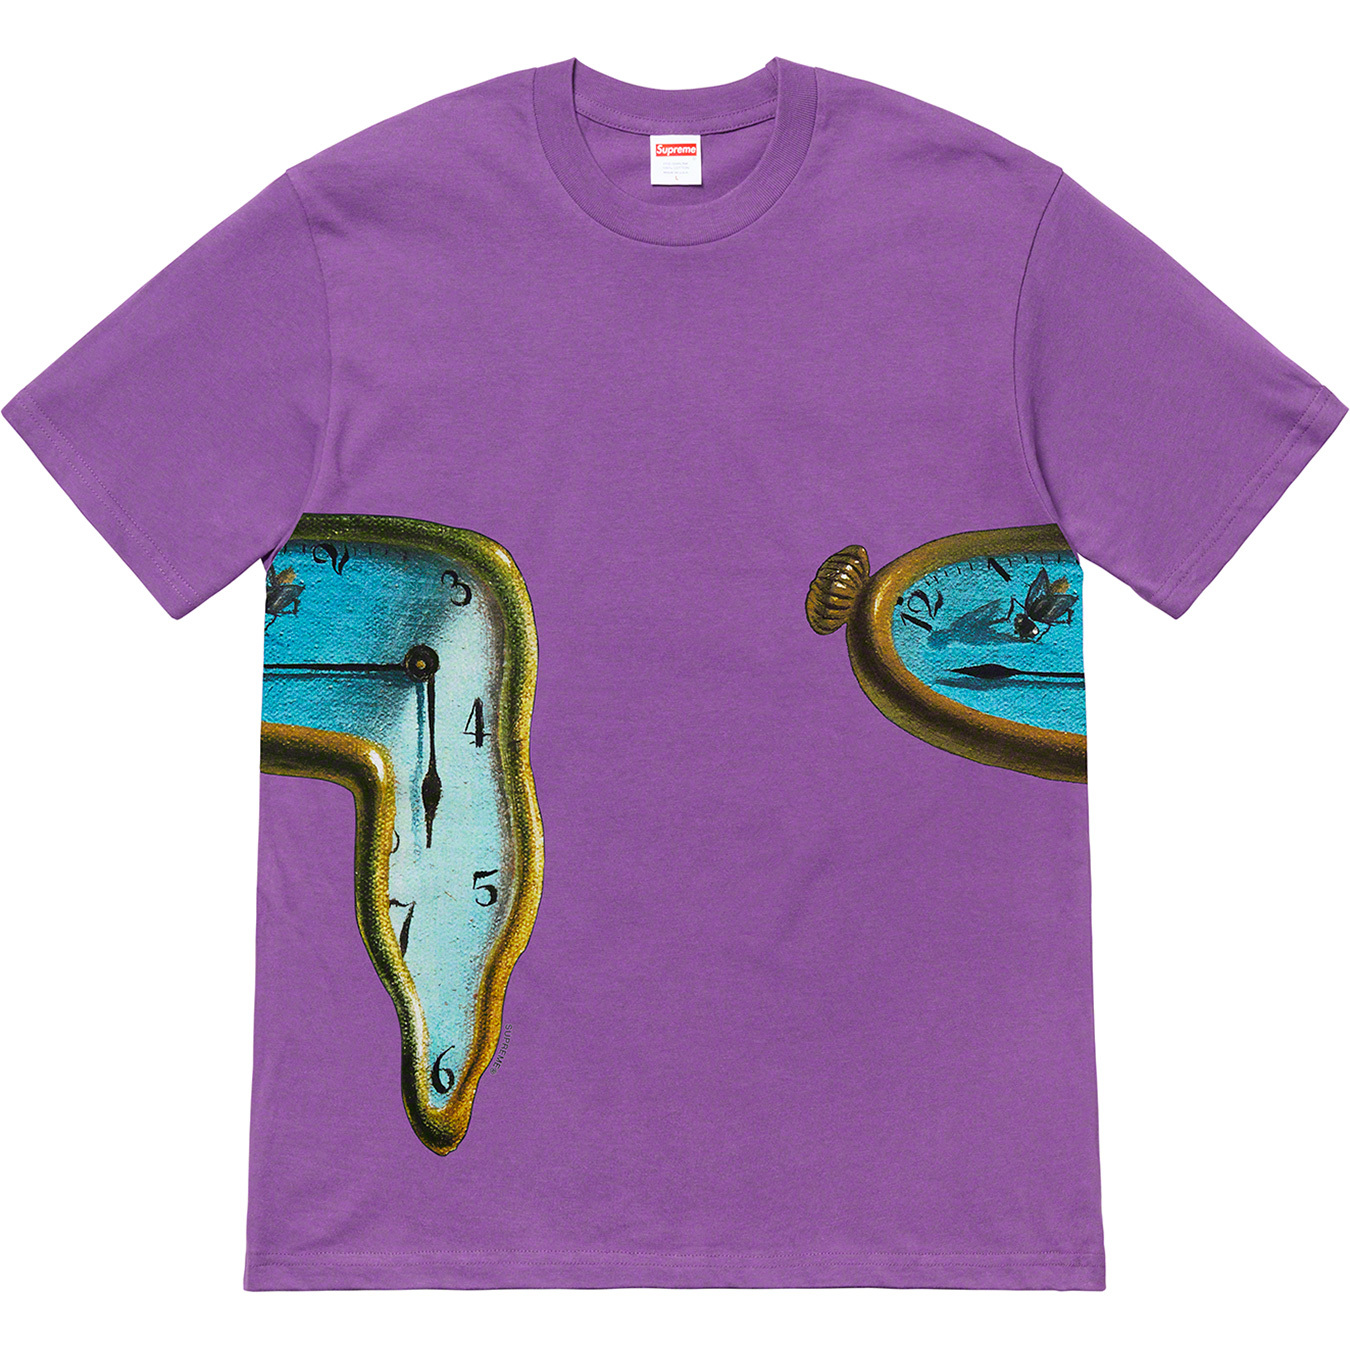 The Persistence of Memory Tee - spring summer 2019 - Supreme